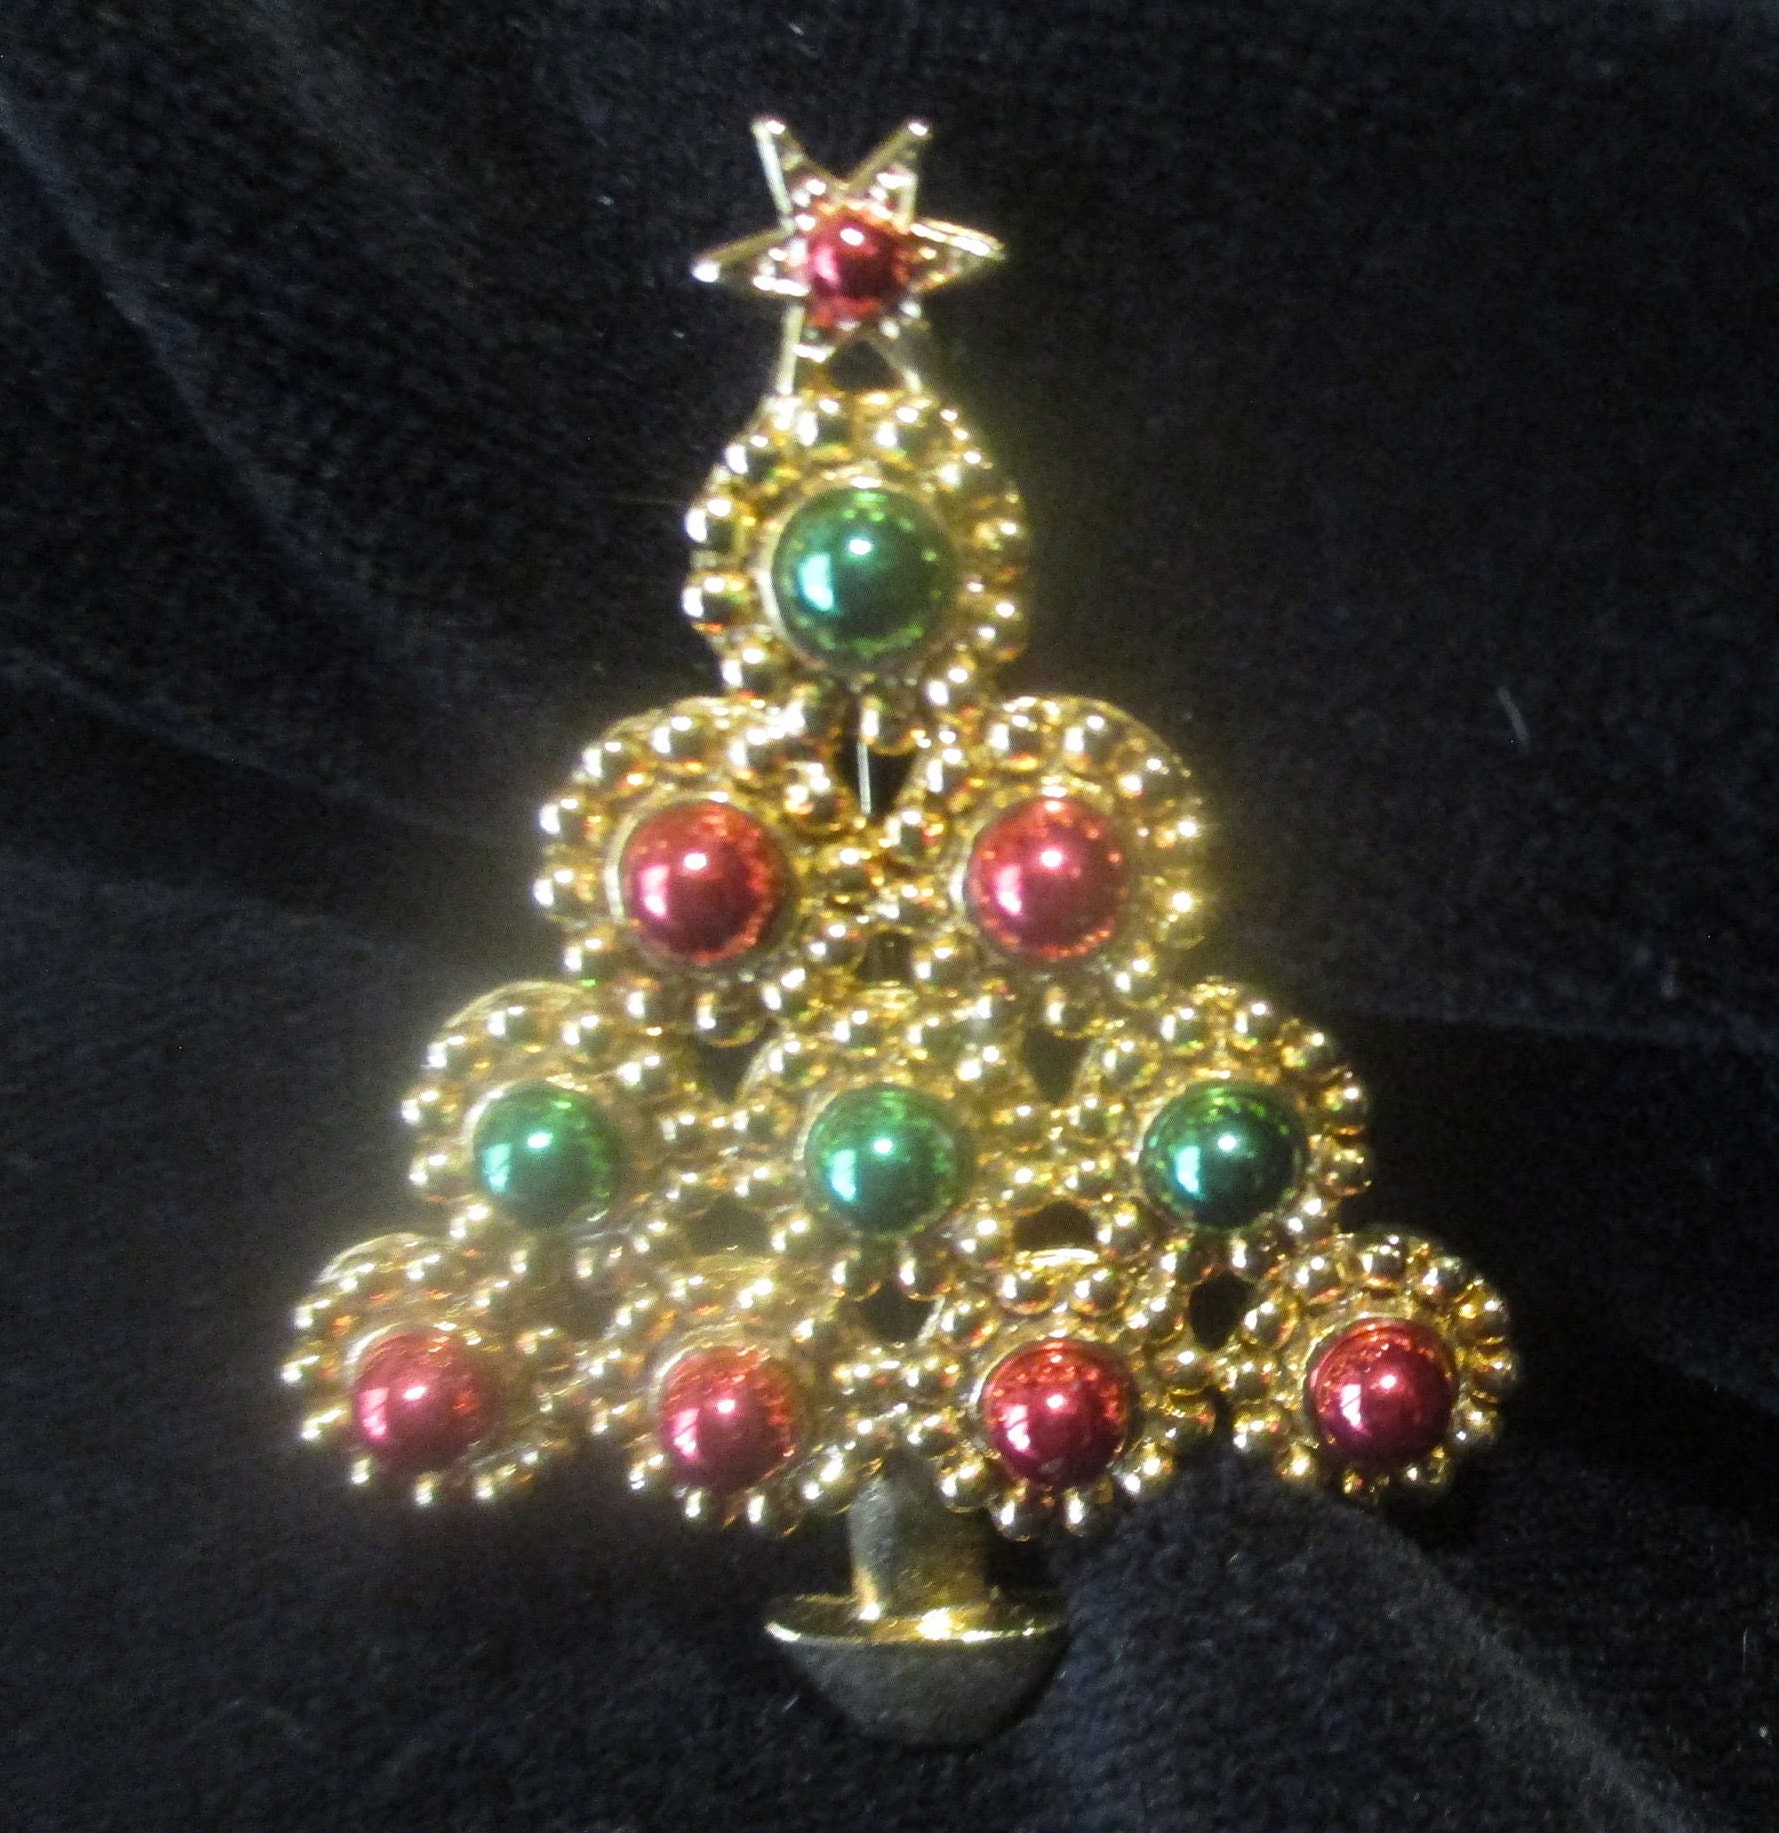 LIA Christmas Tree Pin Rich Red Green Enamel Beads Adorn Tree With Tiny Red  Bead Star Top LIANNA, Inc. in Business 1995 2003 so It's RARE 